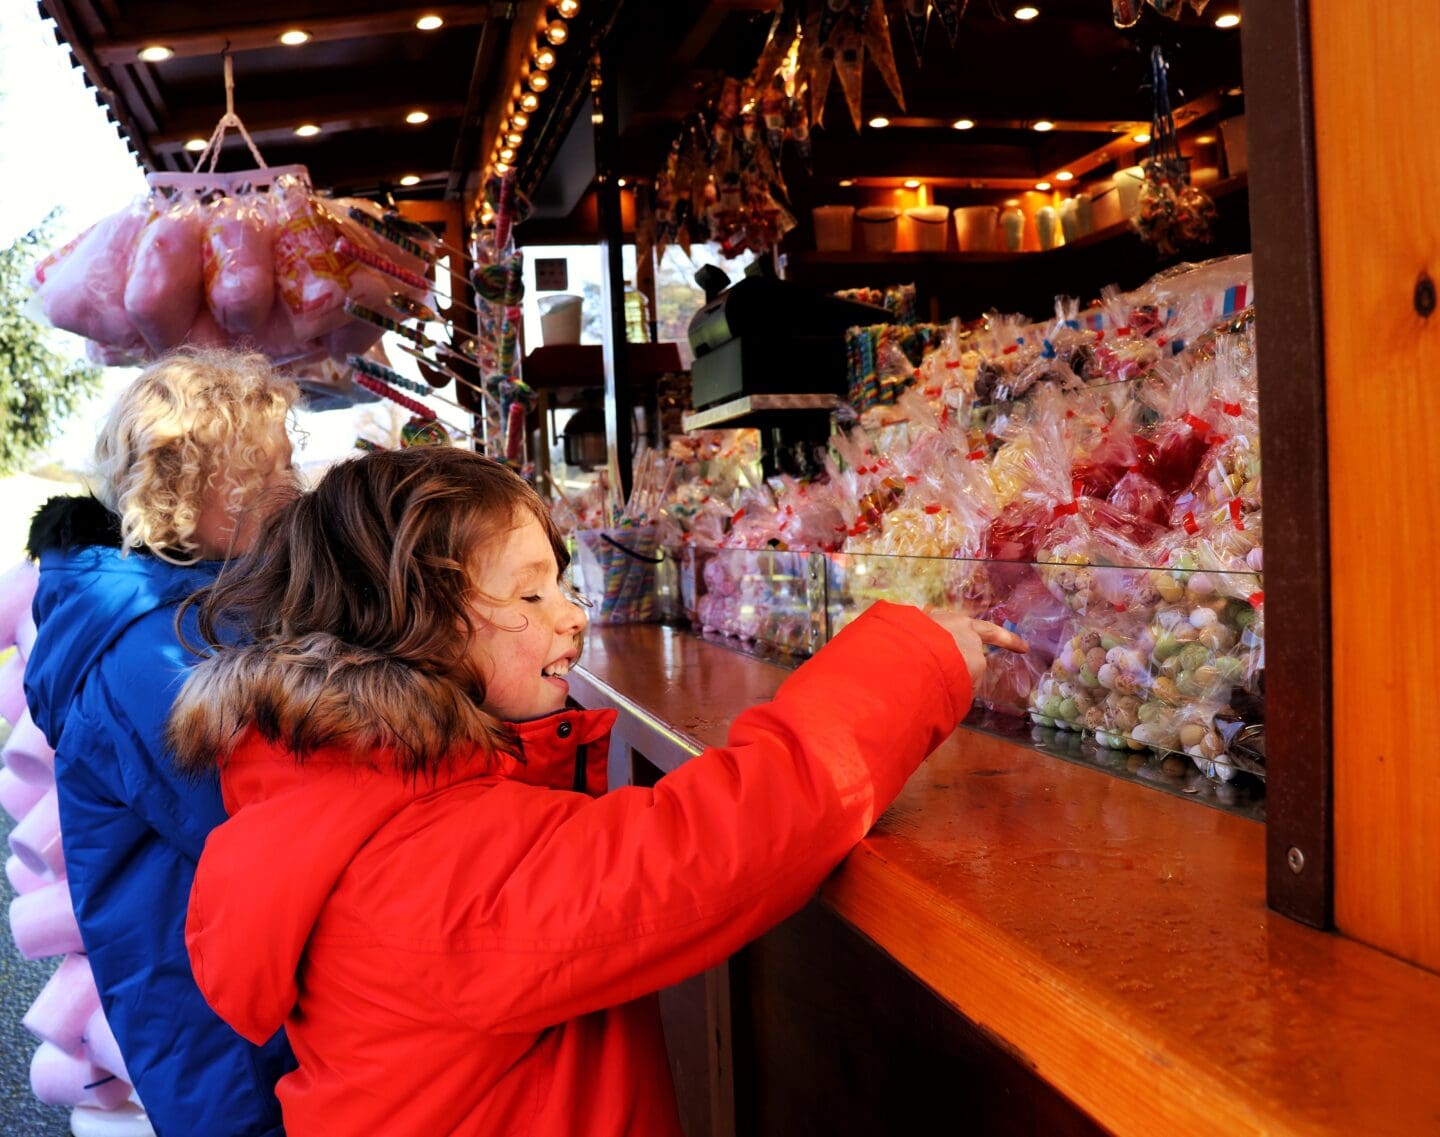 Children choosing sweets at Christmas market stall